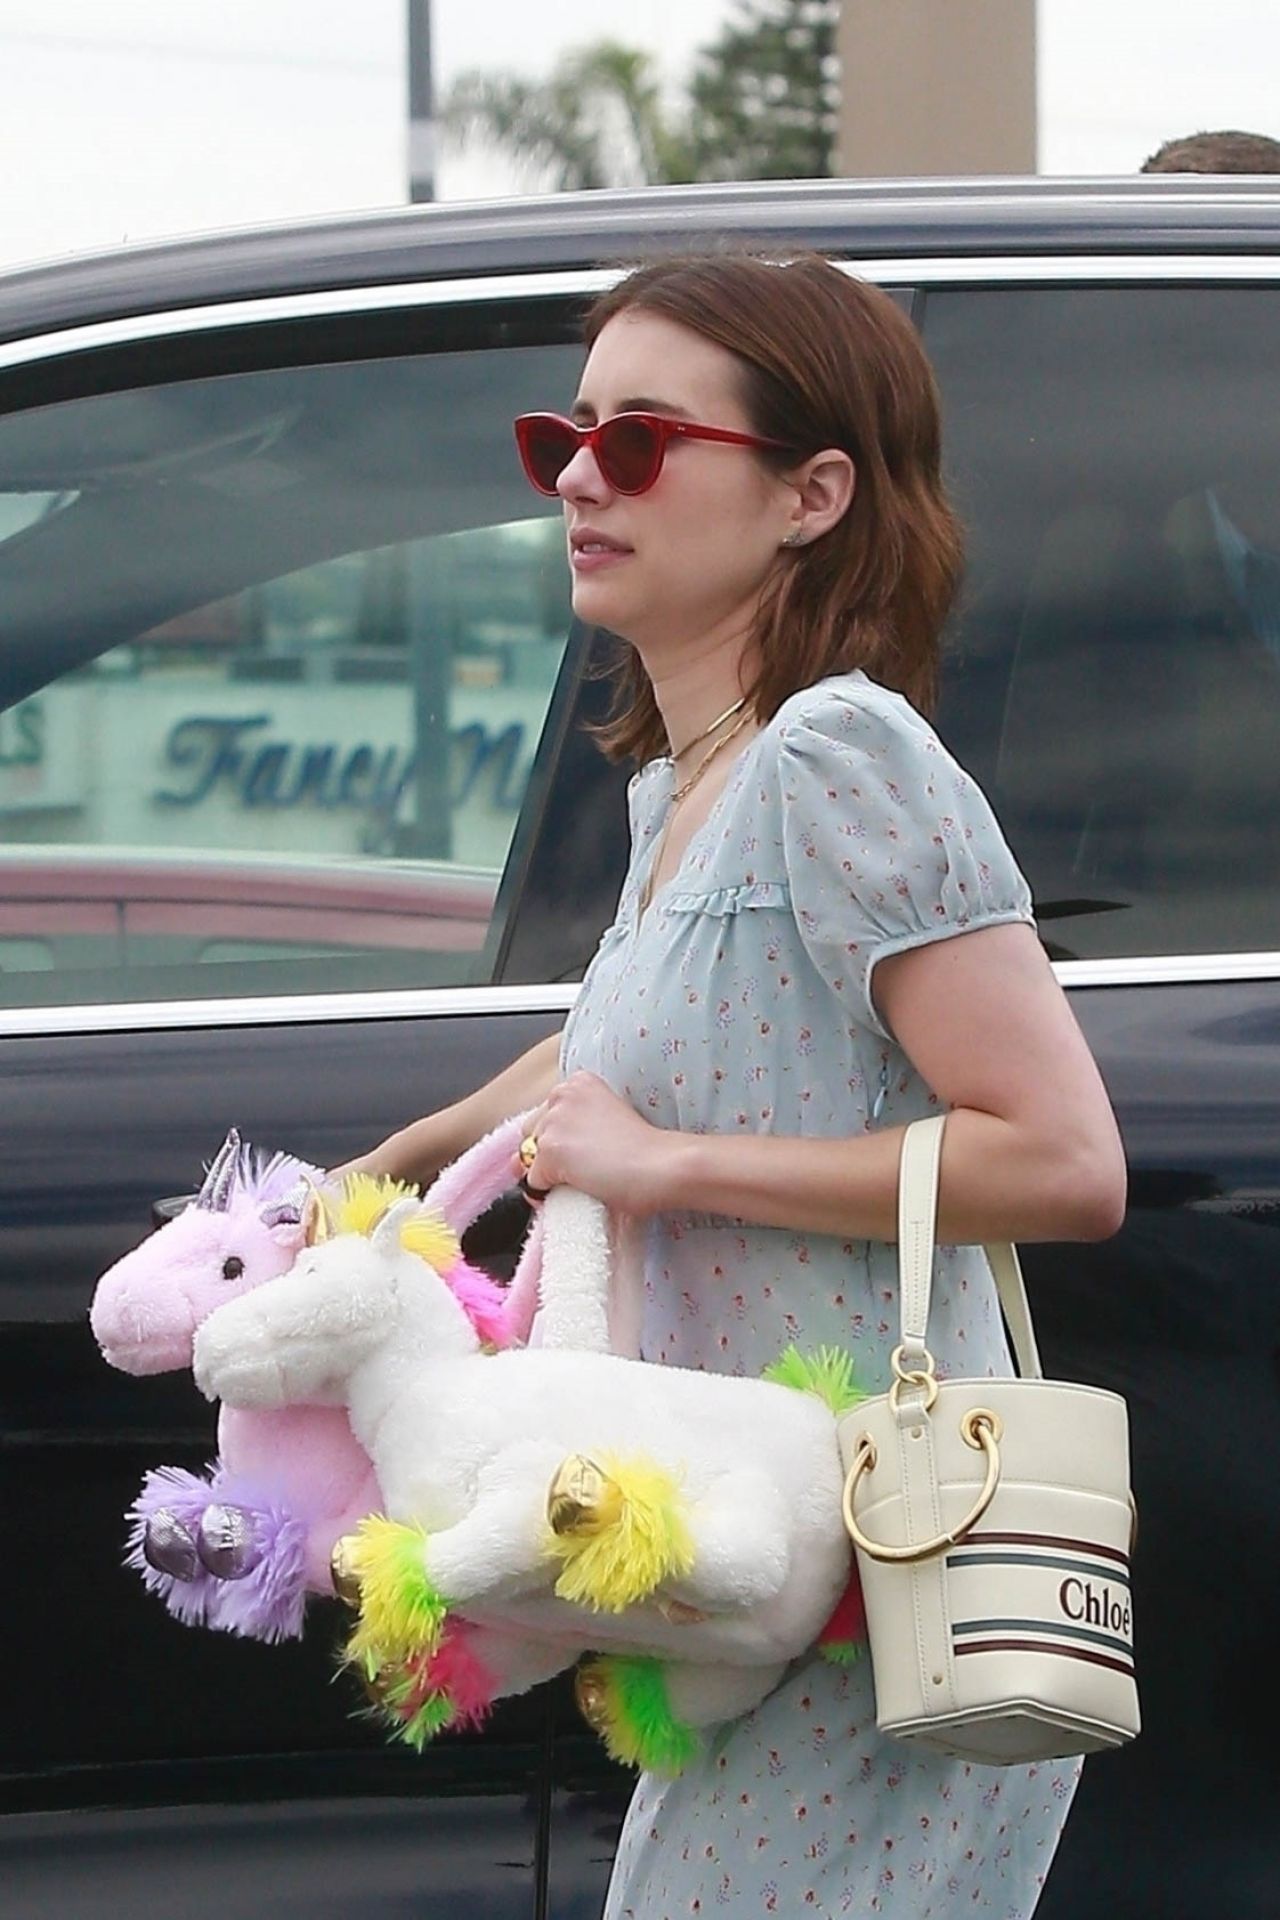 emma-roberts-shopping-on-easter-in-los-angeles-04-21-2019-4.jpg